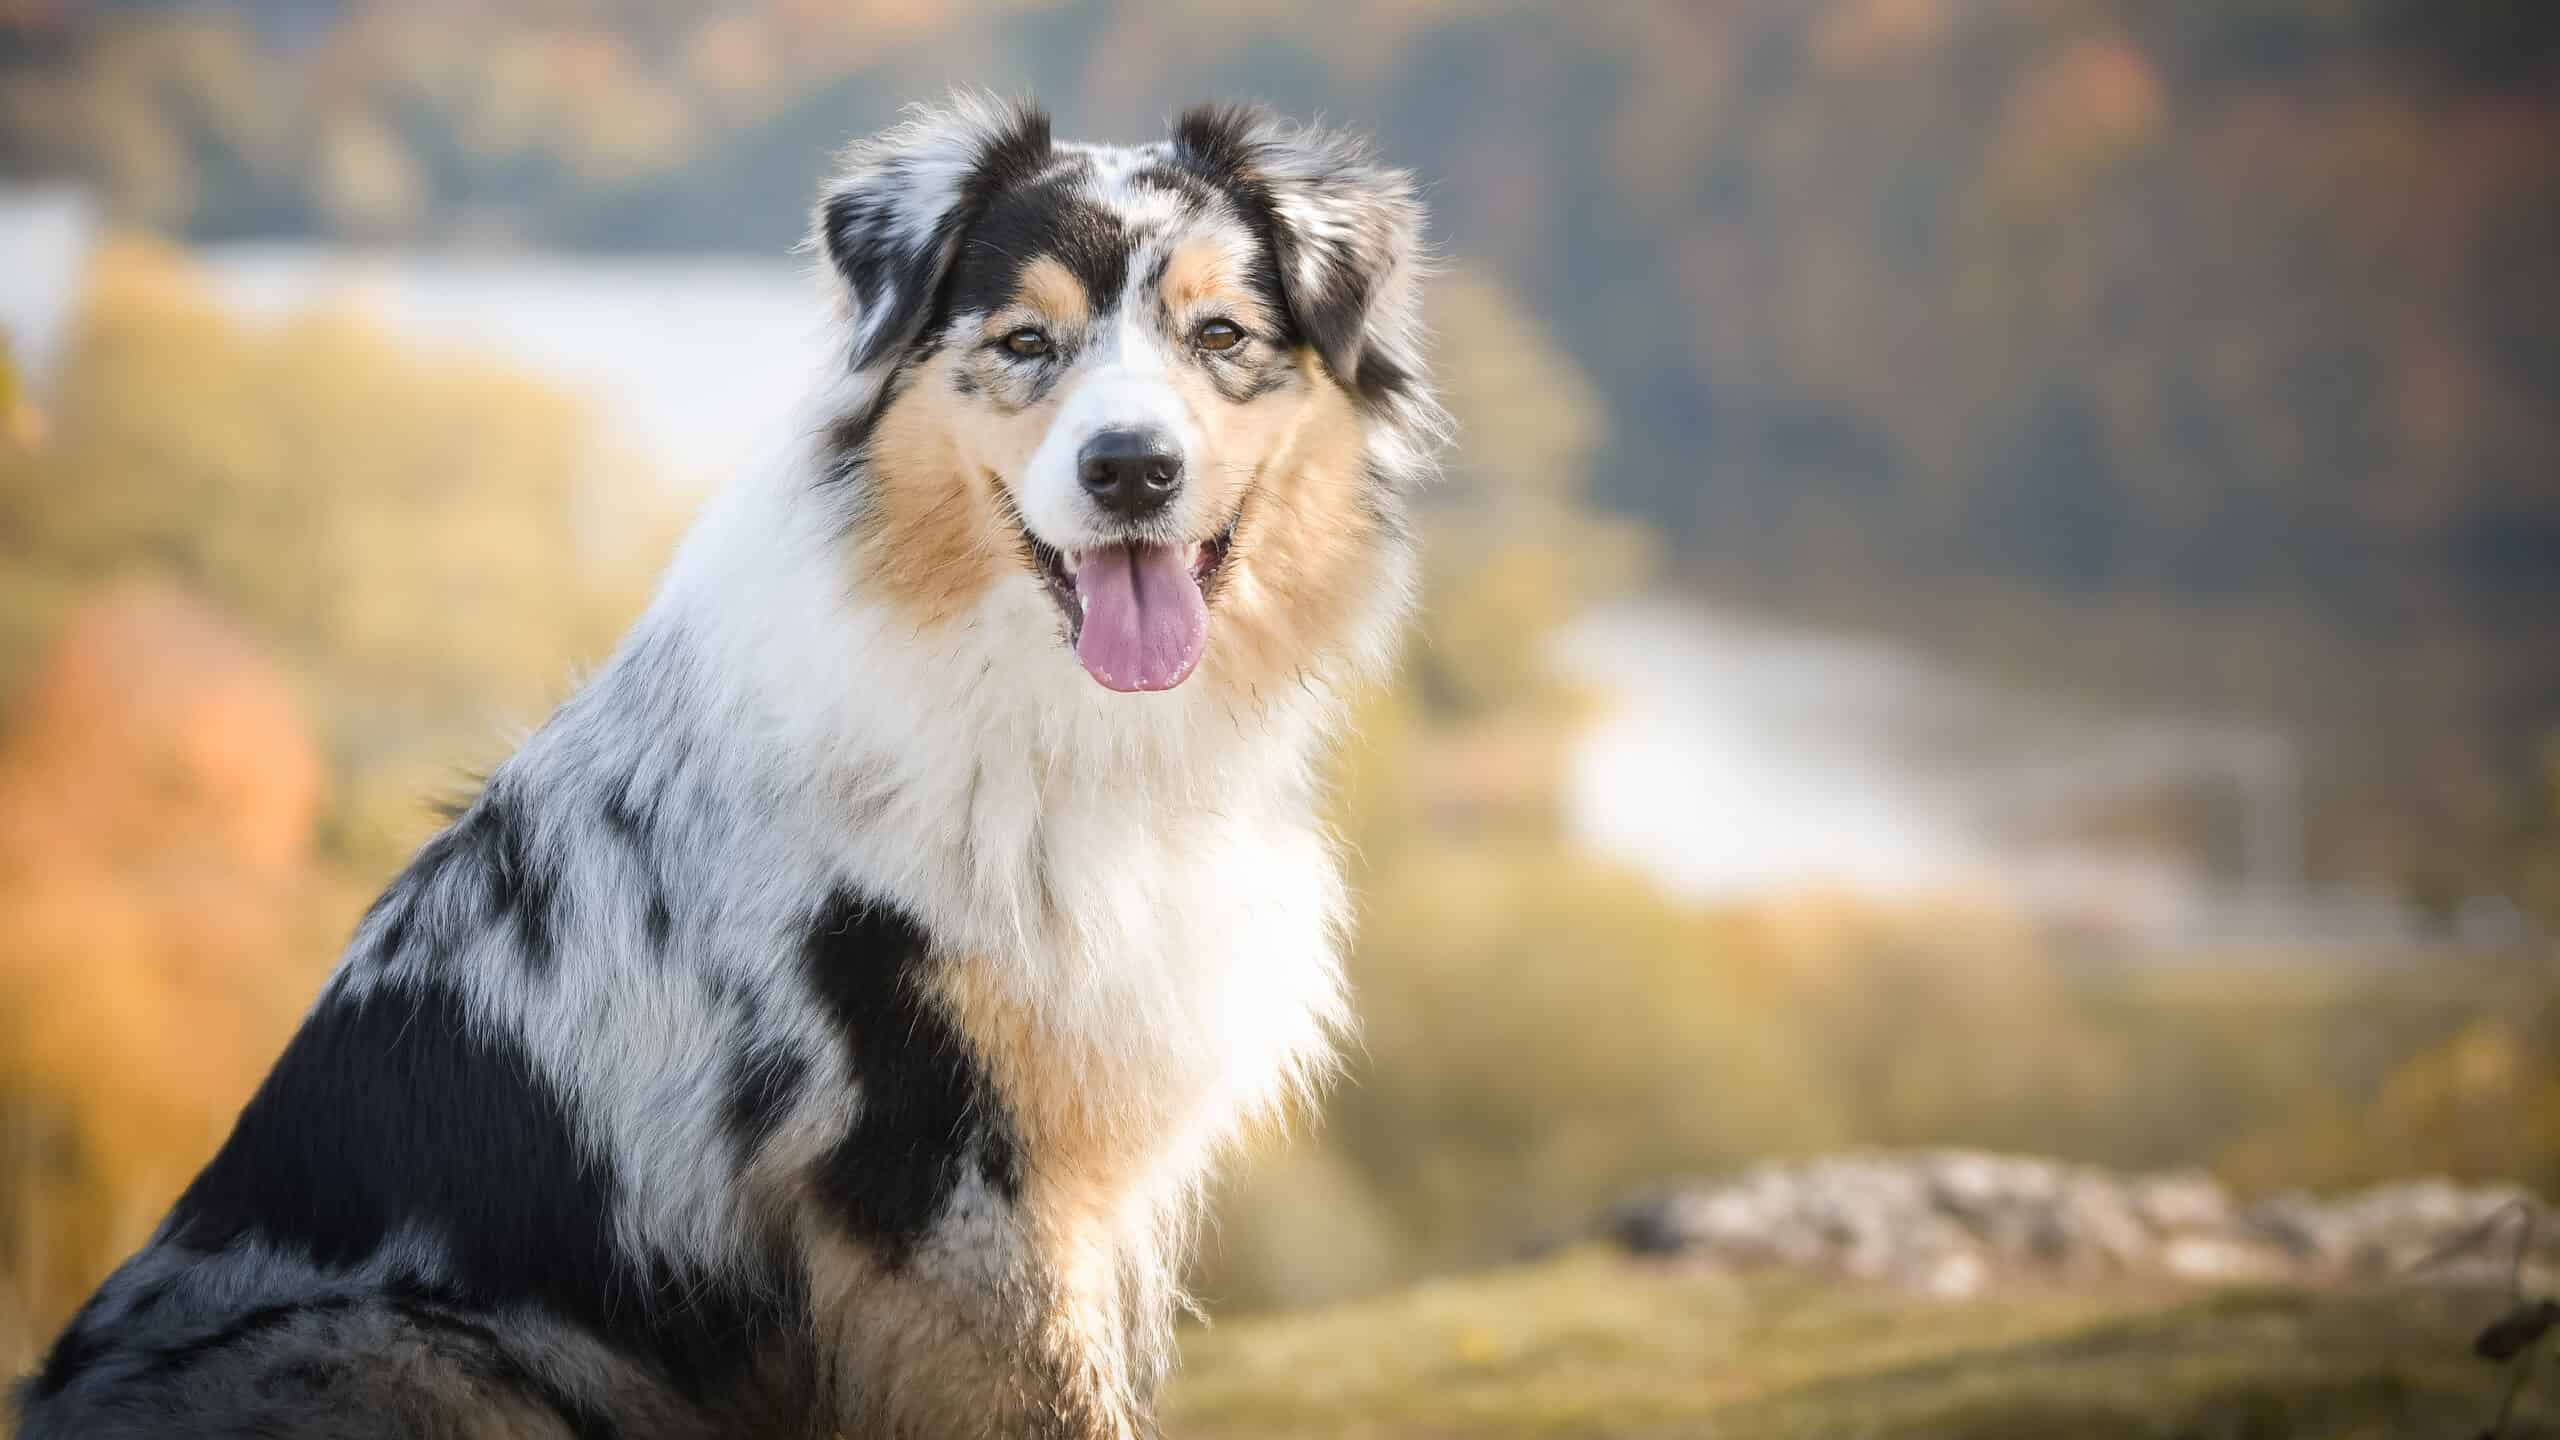 10 Things You Should Know Before Owning an Australian Shepherd